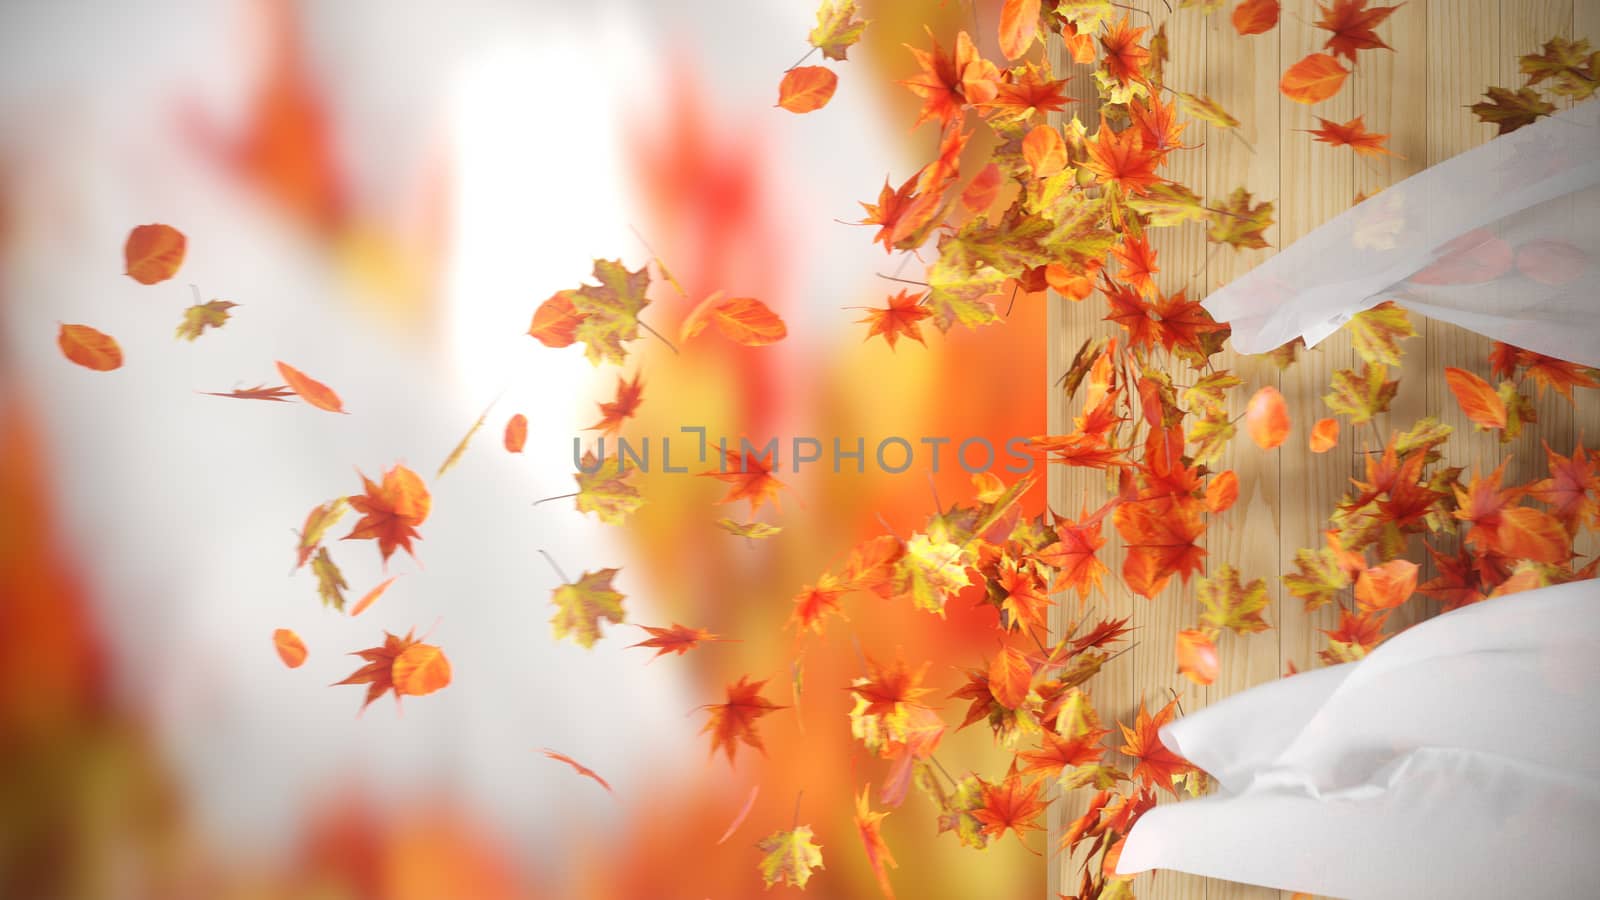 falling and winding Autumn Leaves with curtains background